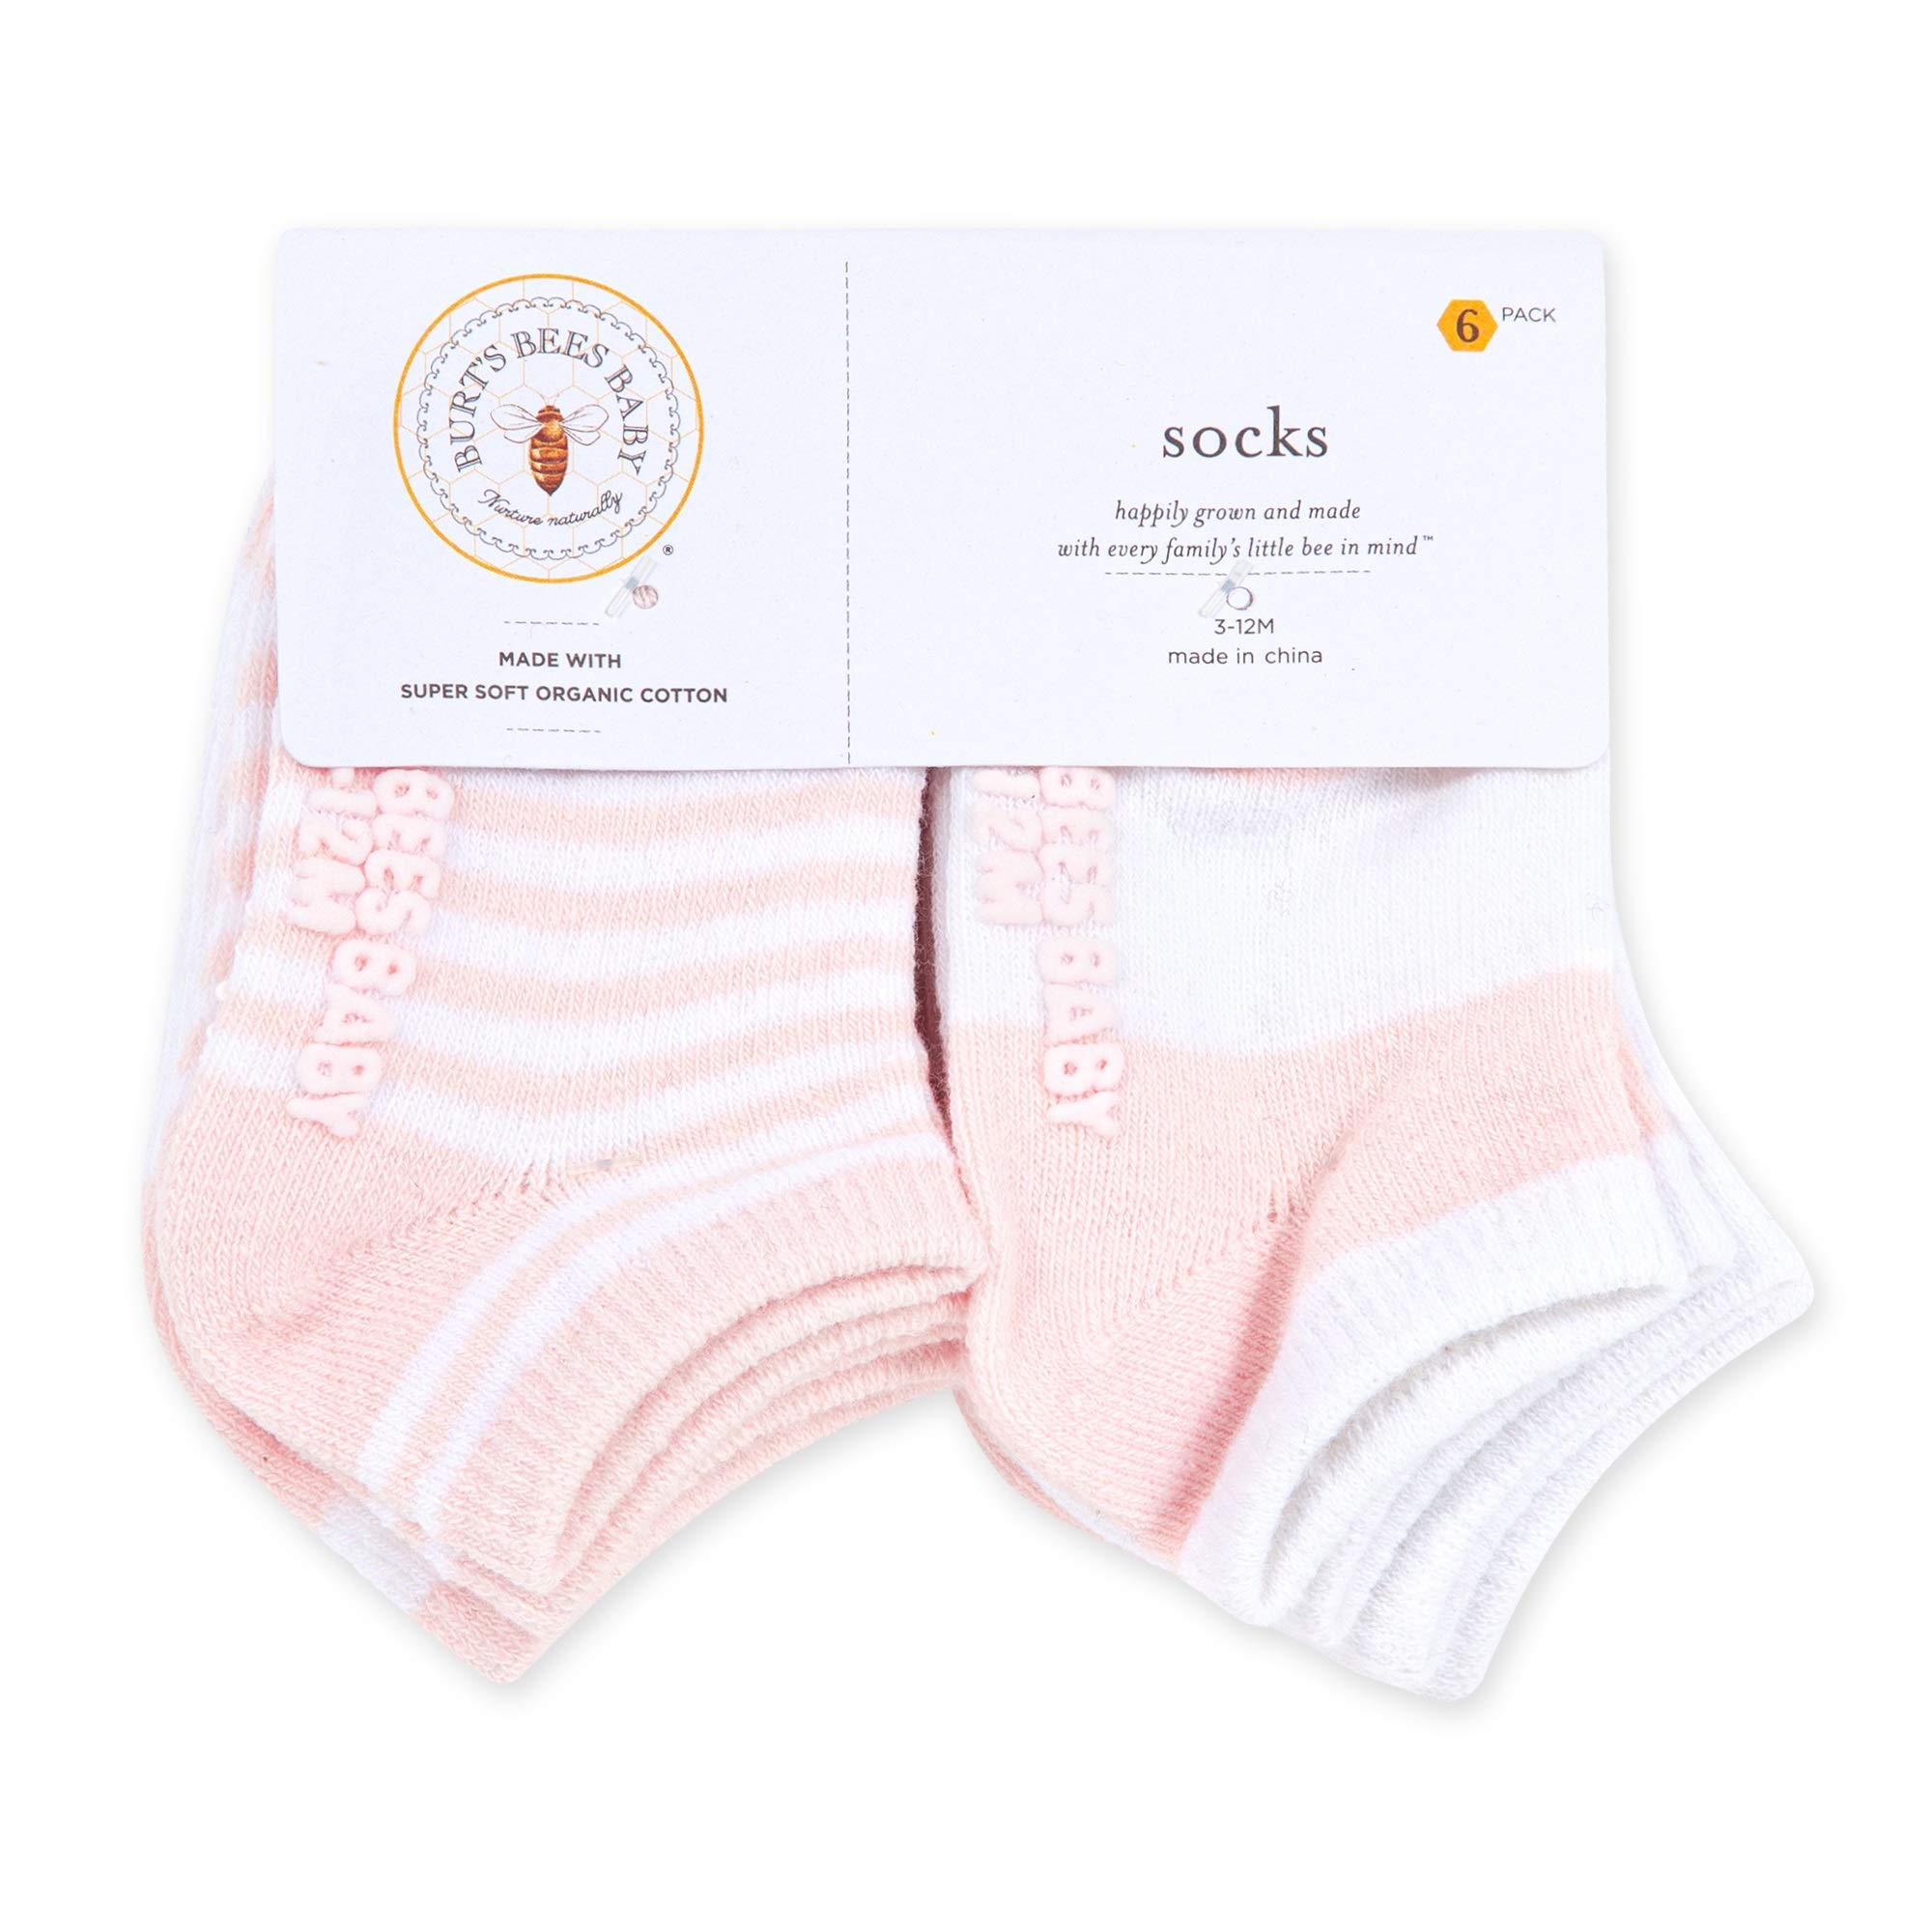 Burt's Bees Baby unisex-baby Socks, 6-pack Ankle Or Crew With Non-slip Grips, Made With Organic Cotton